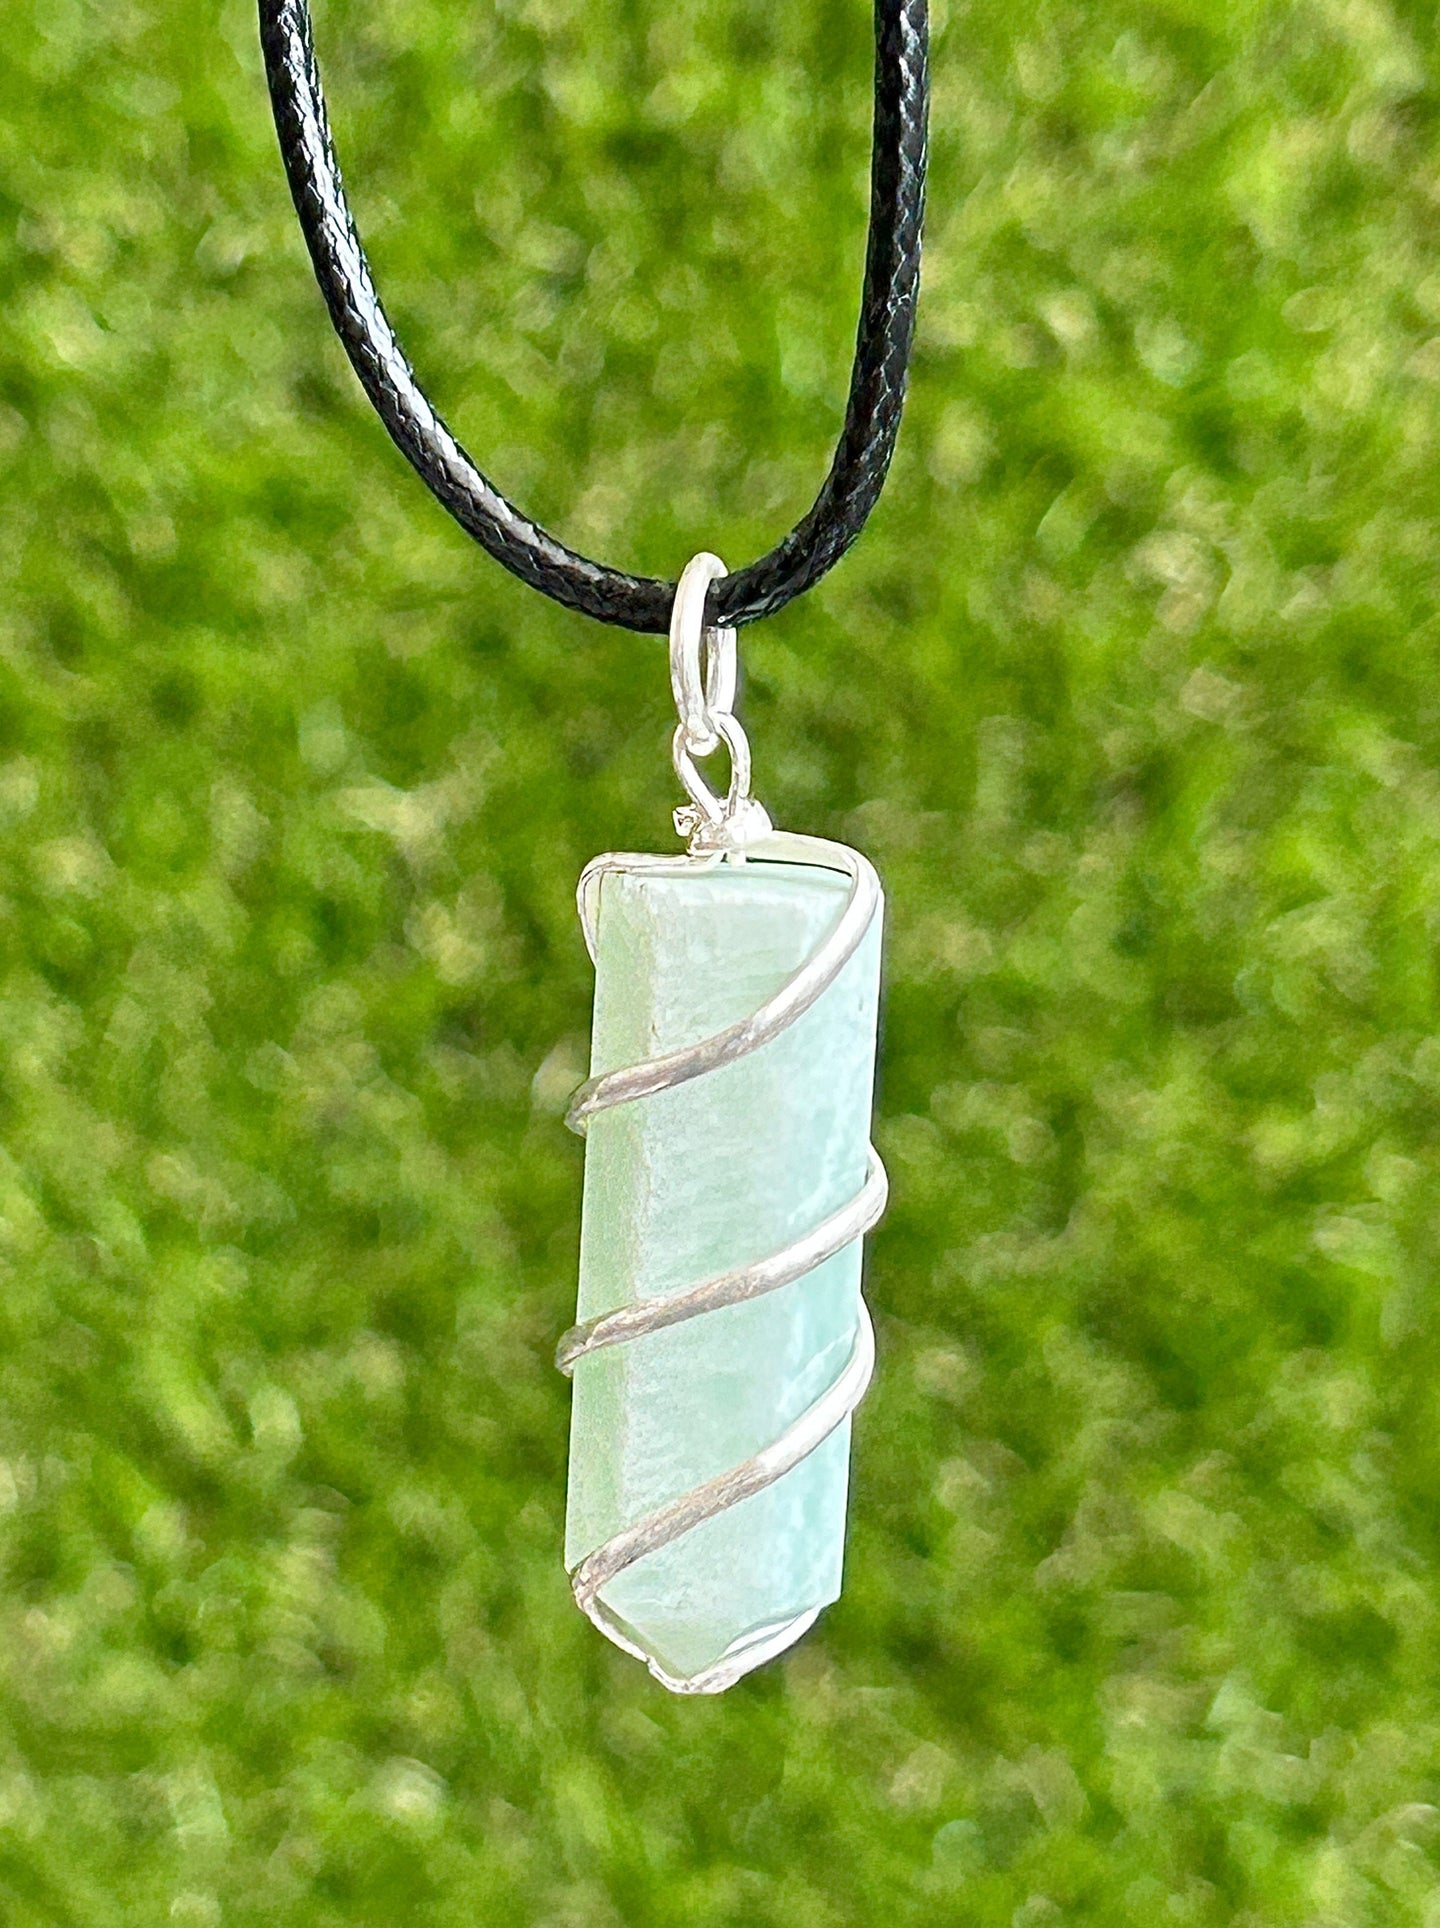 Amazonite Spiral Wrap Point Necklace